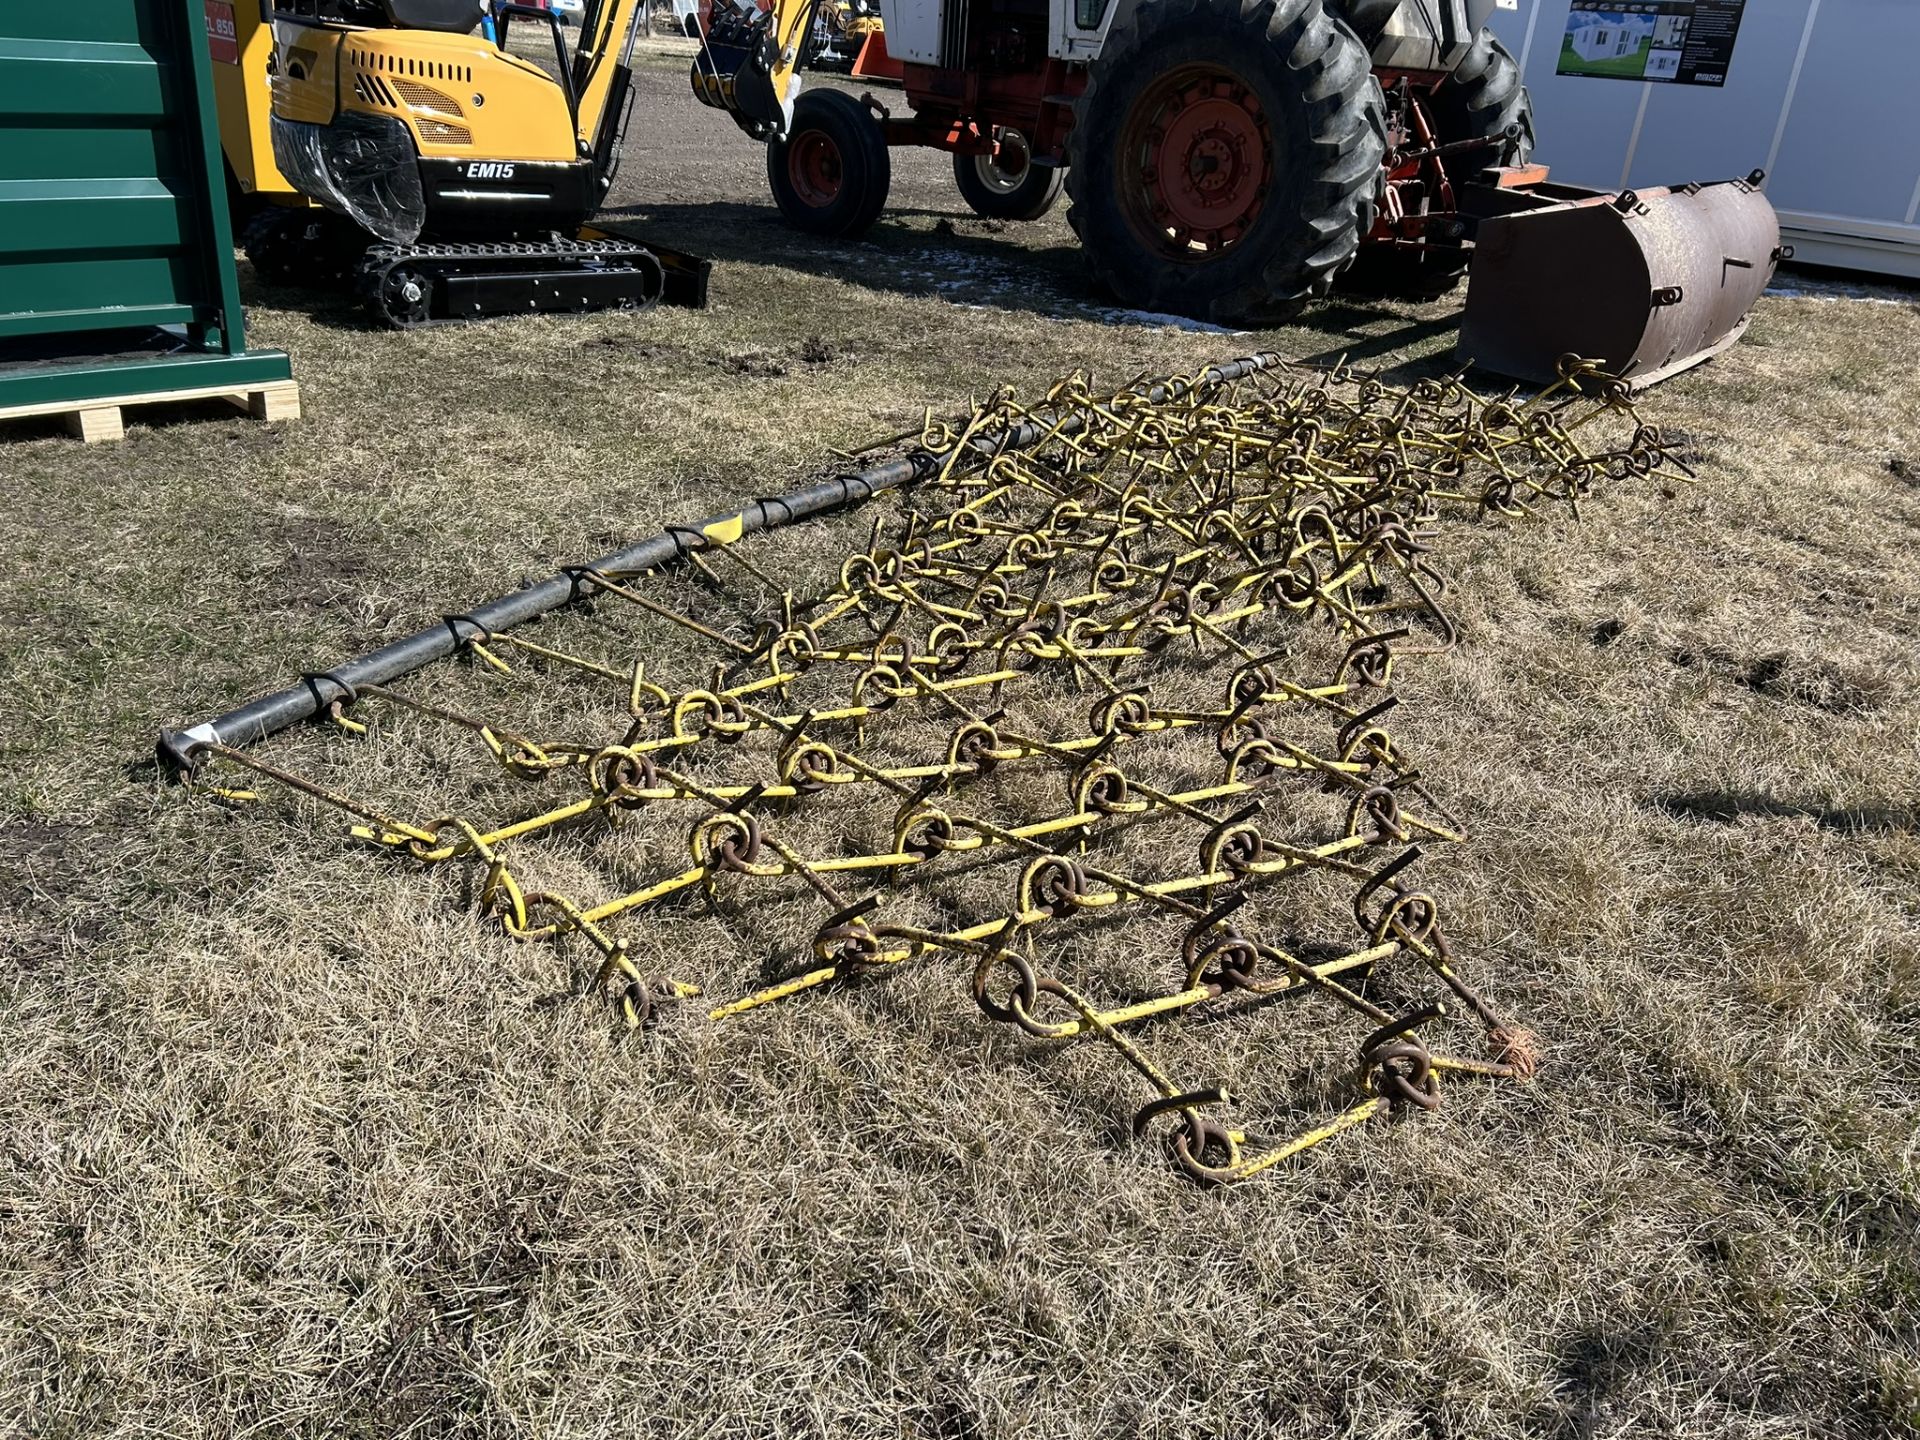 SET OF PASTURE CHAIN HARROWS W/ DRAW BAR - 15 FT - Image 4 of 4